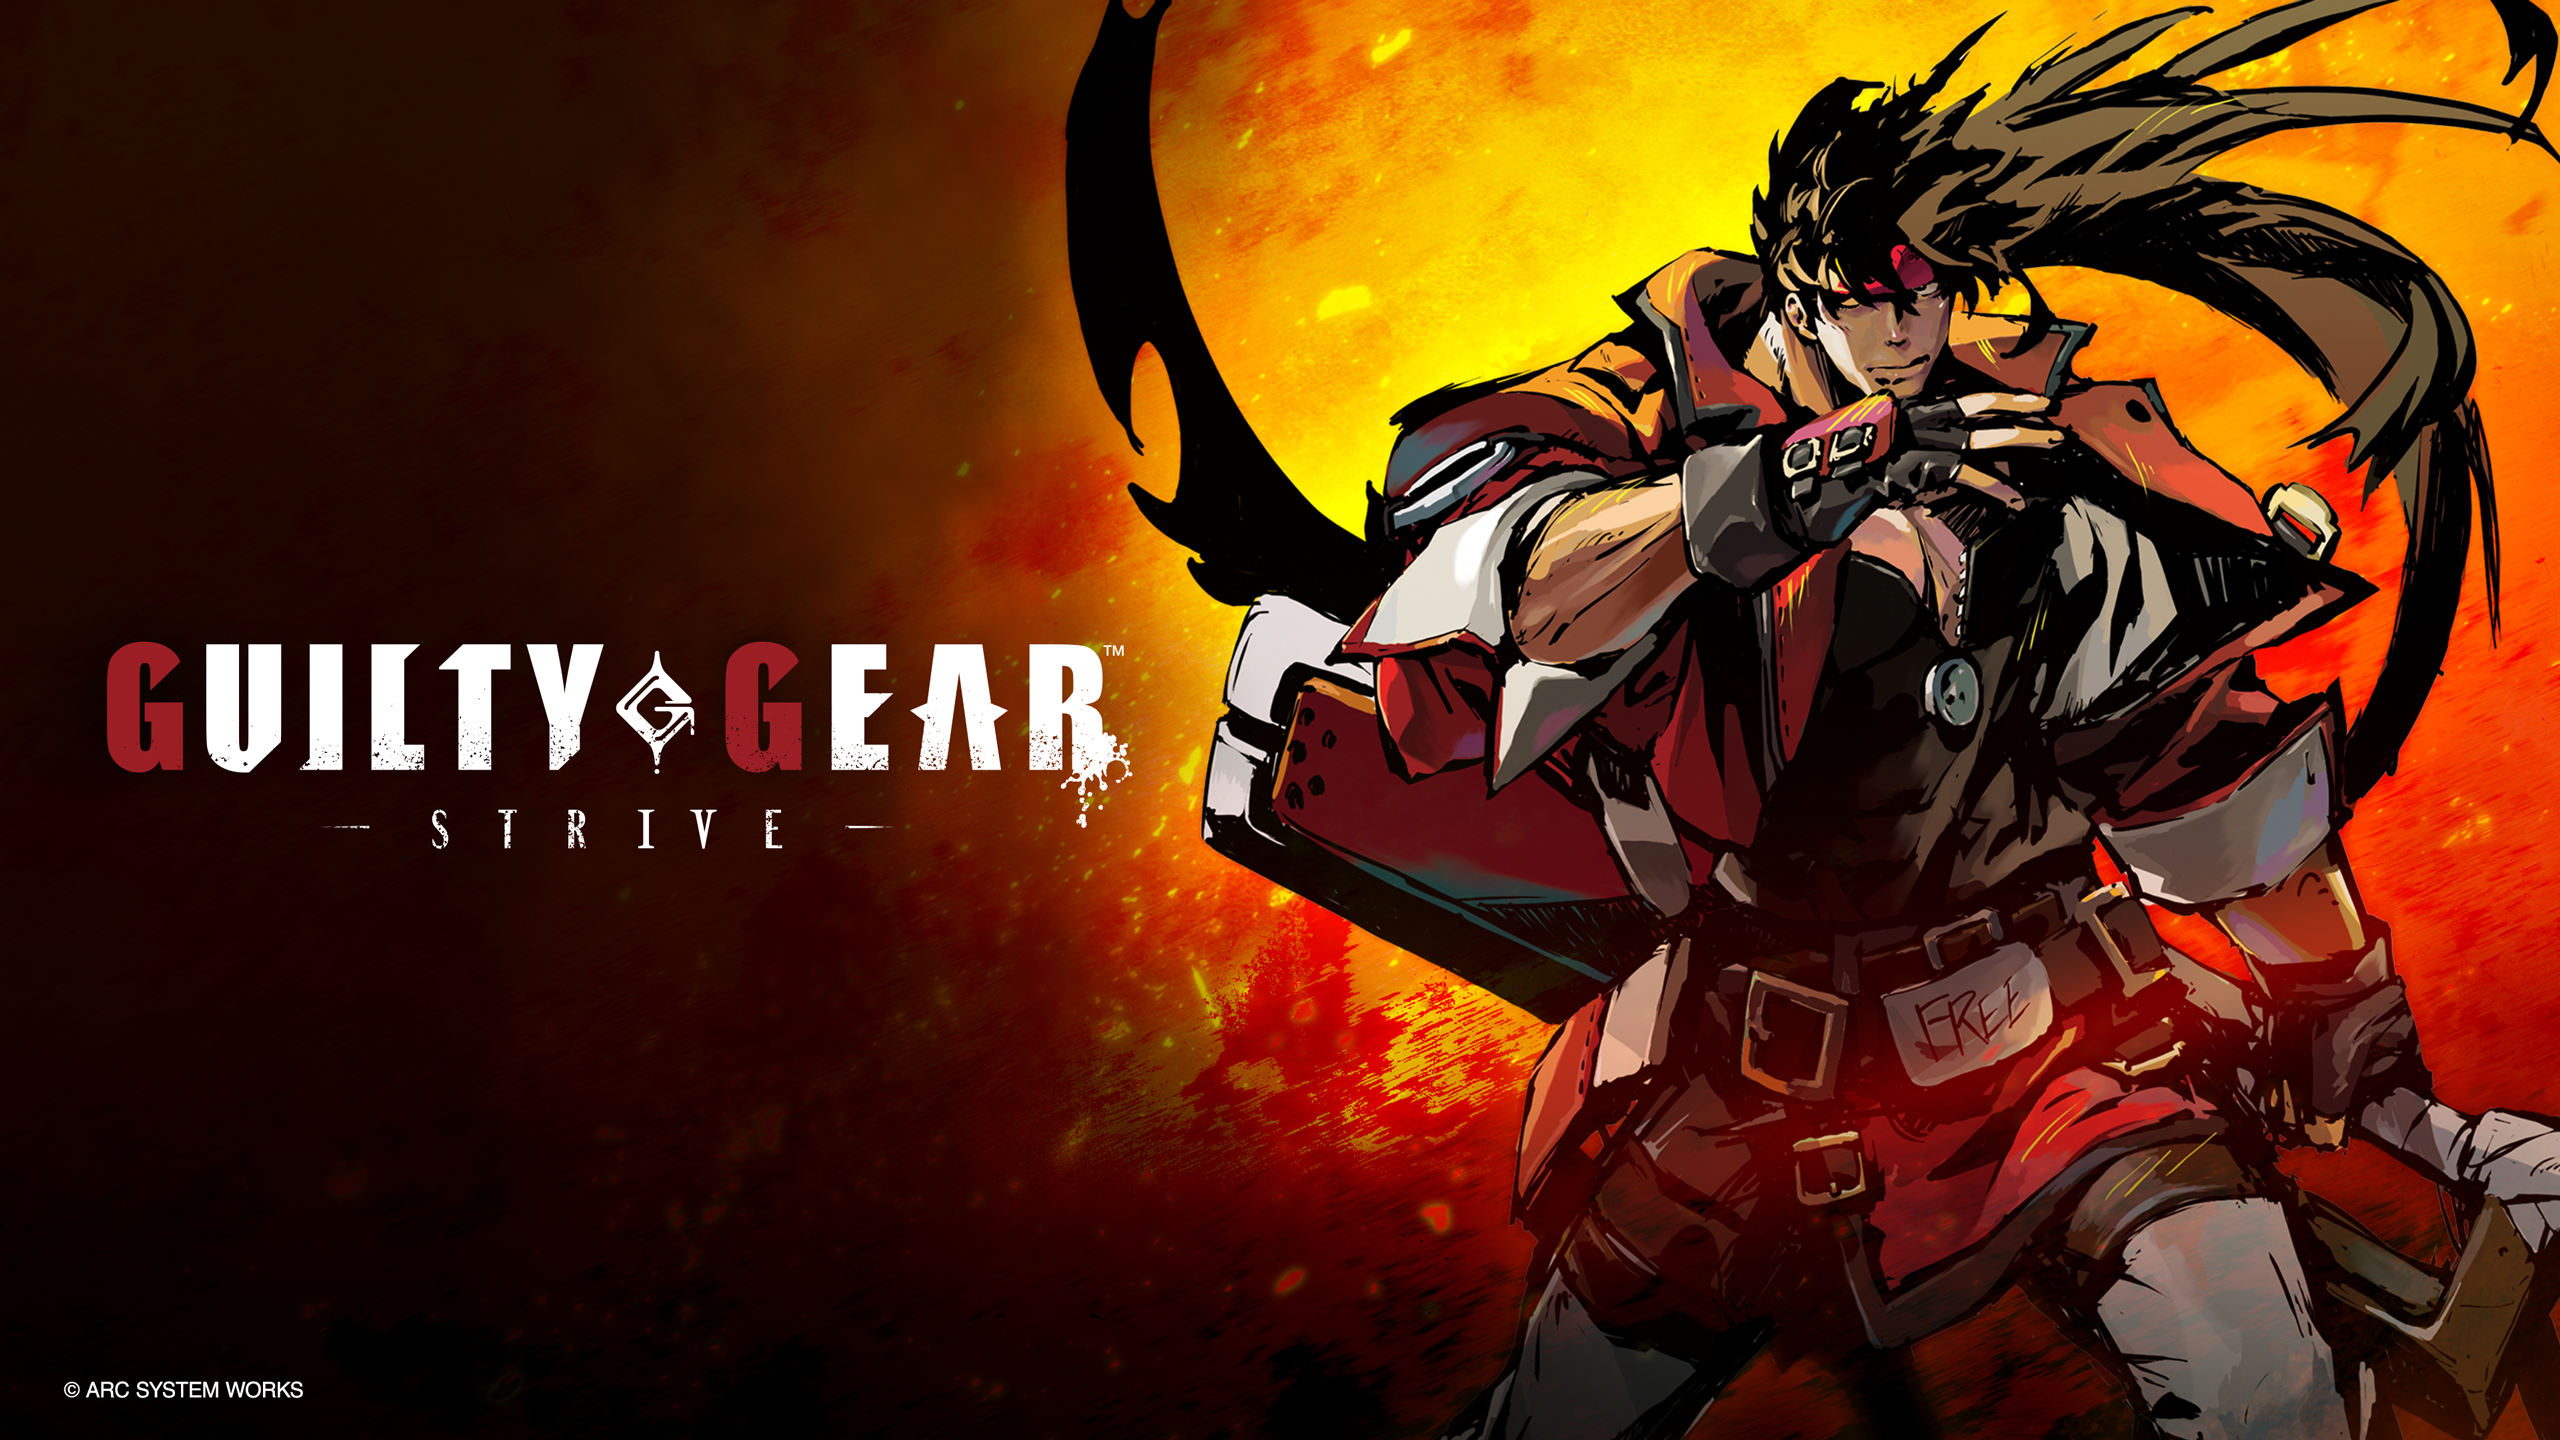 HD Guilty Gear -Strive- wallpaper featuring a dynamic character pose with fiery background.